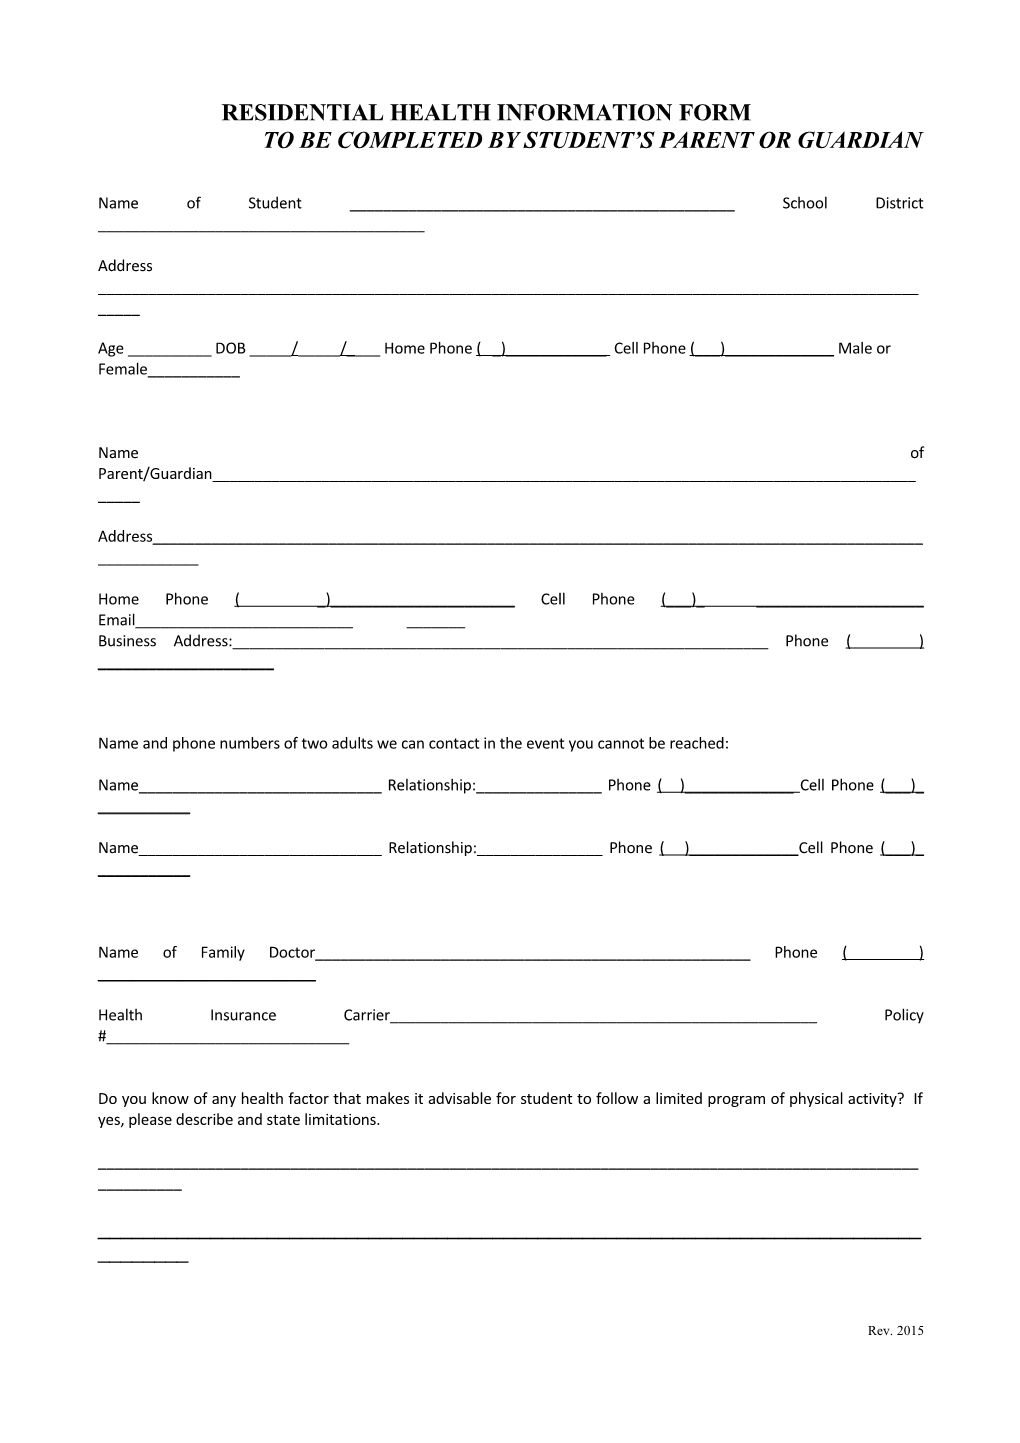 Residential Health Information Form